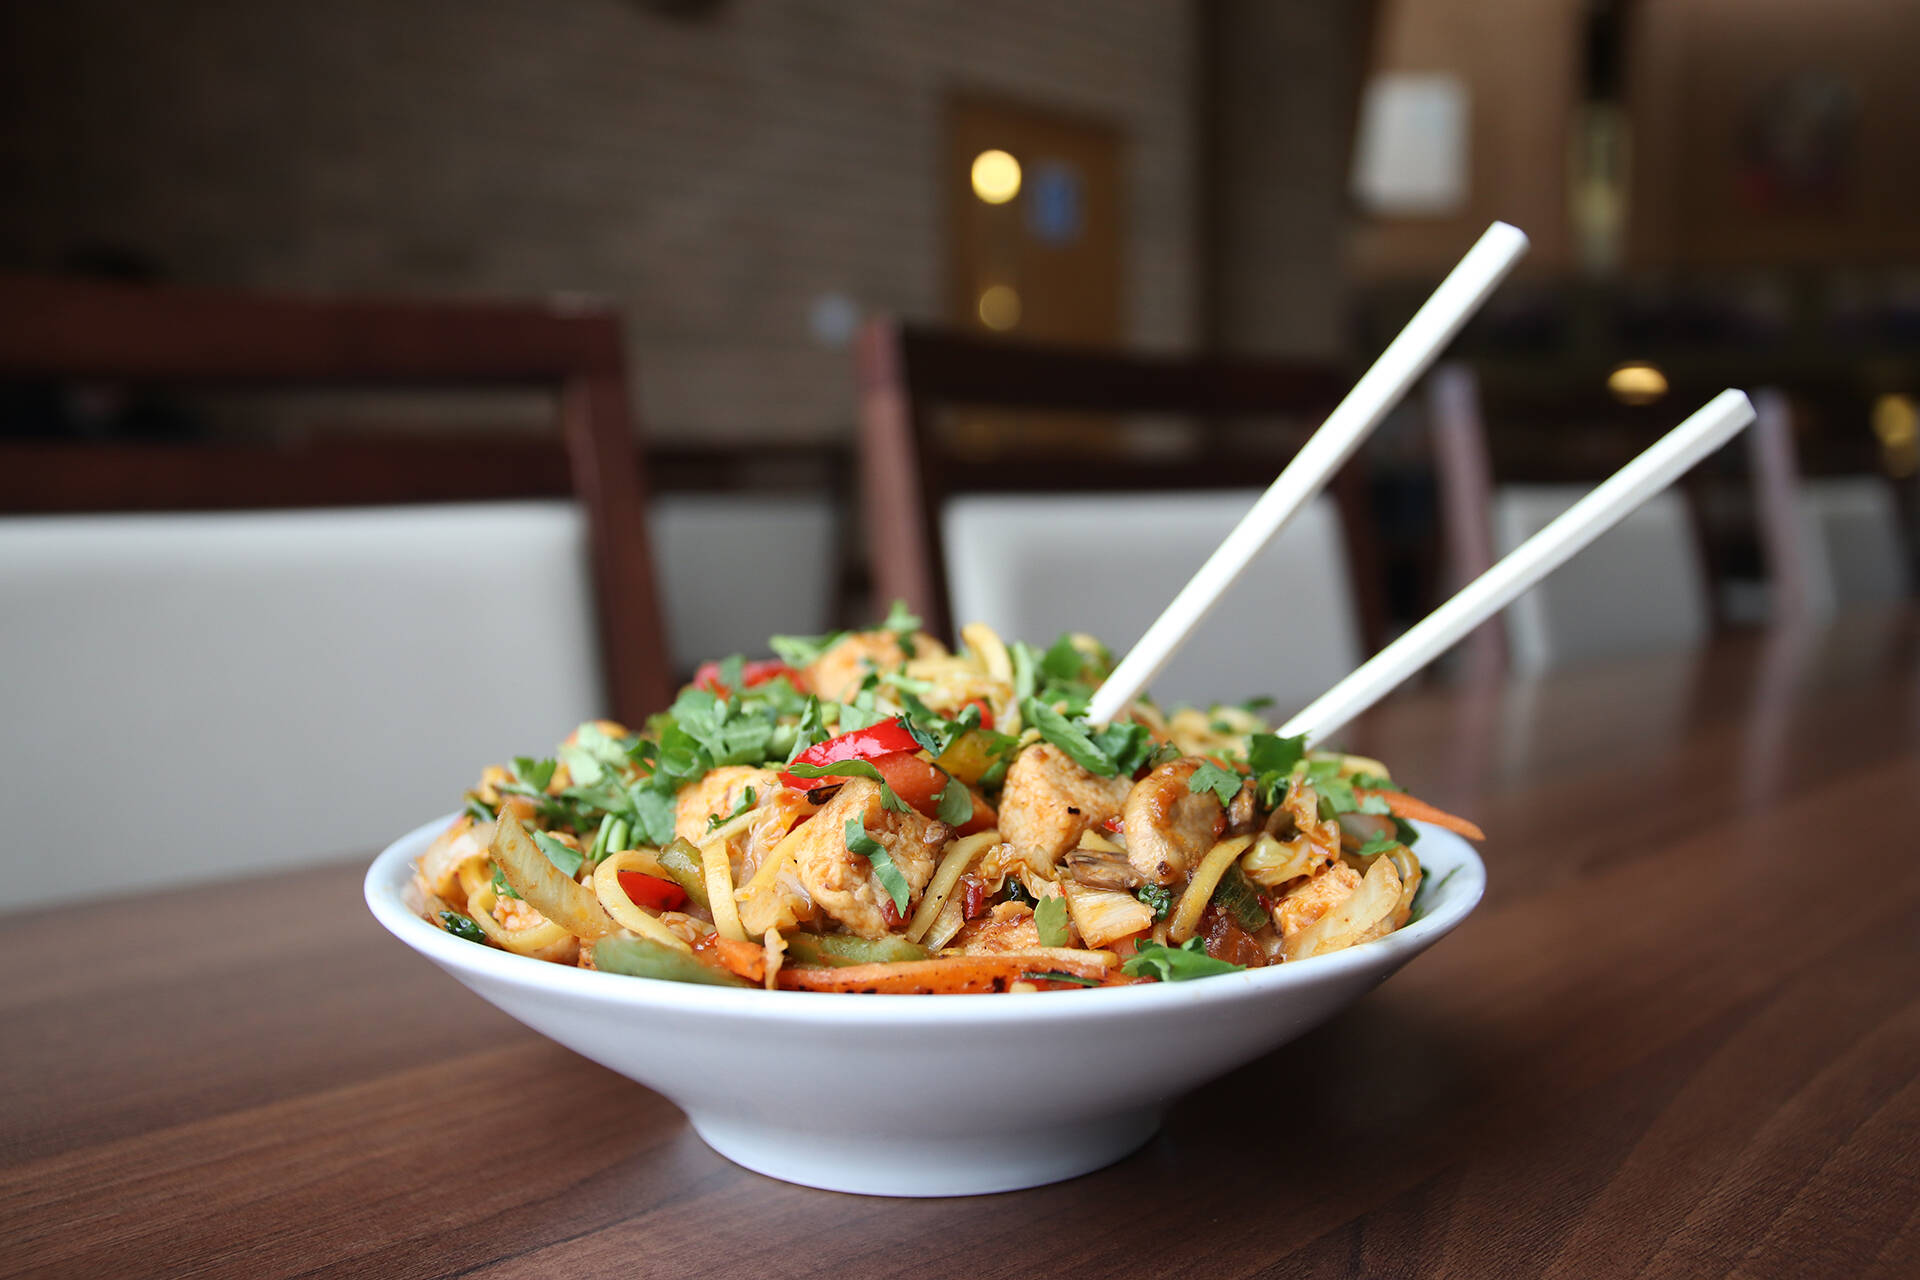 A chicken, vegetable and noodle stir fry in a bowl with two chopsticks